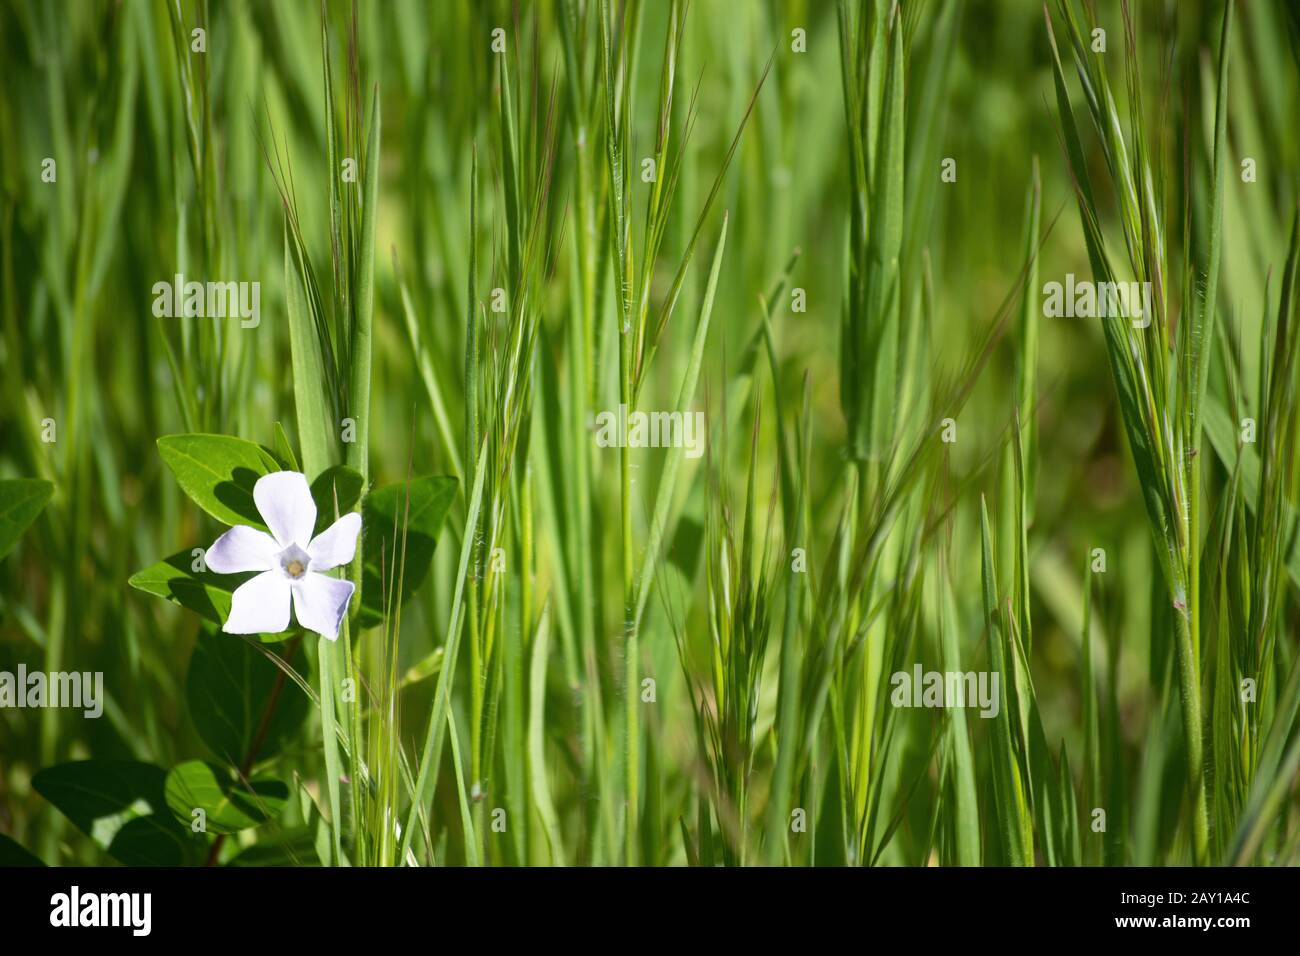 Pretty small little flower with long green grass in the background with space for a logo or and text Stock Photo